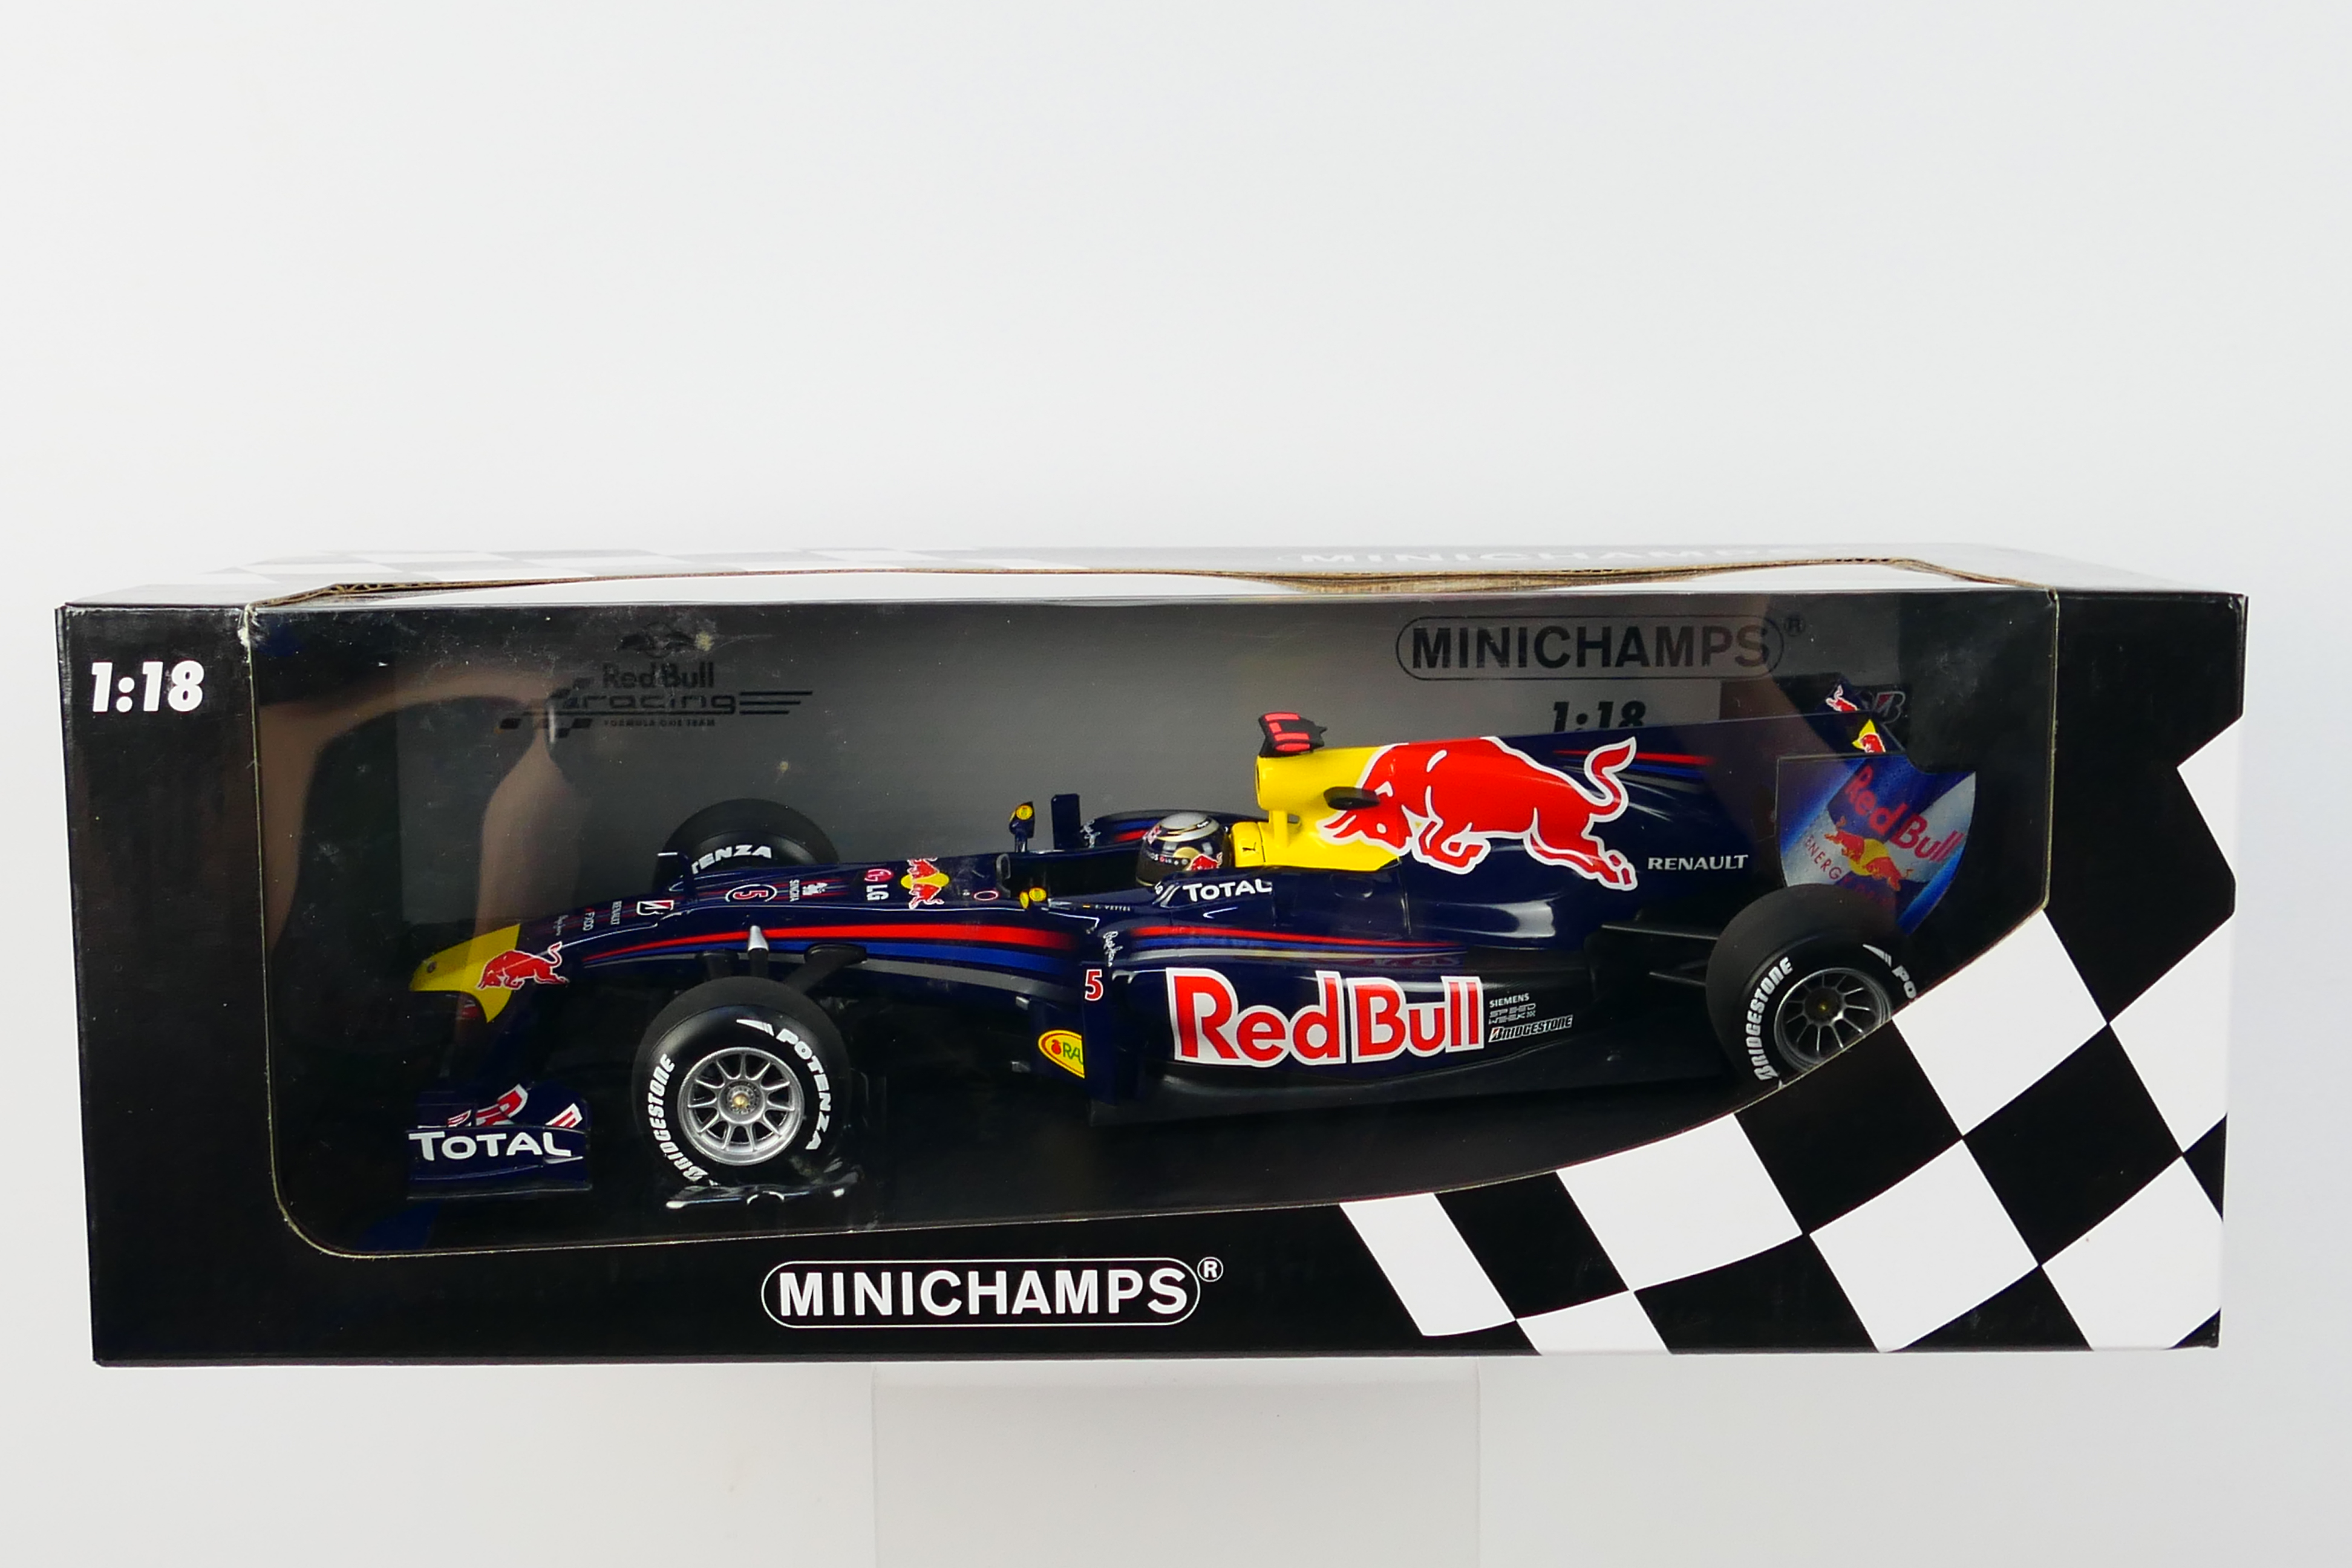 Minichamps- A boxed 1:18 scale Red Bull Racing Renault RB6 Sebastian Vettel 2010 car which appears